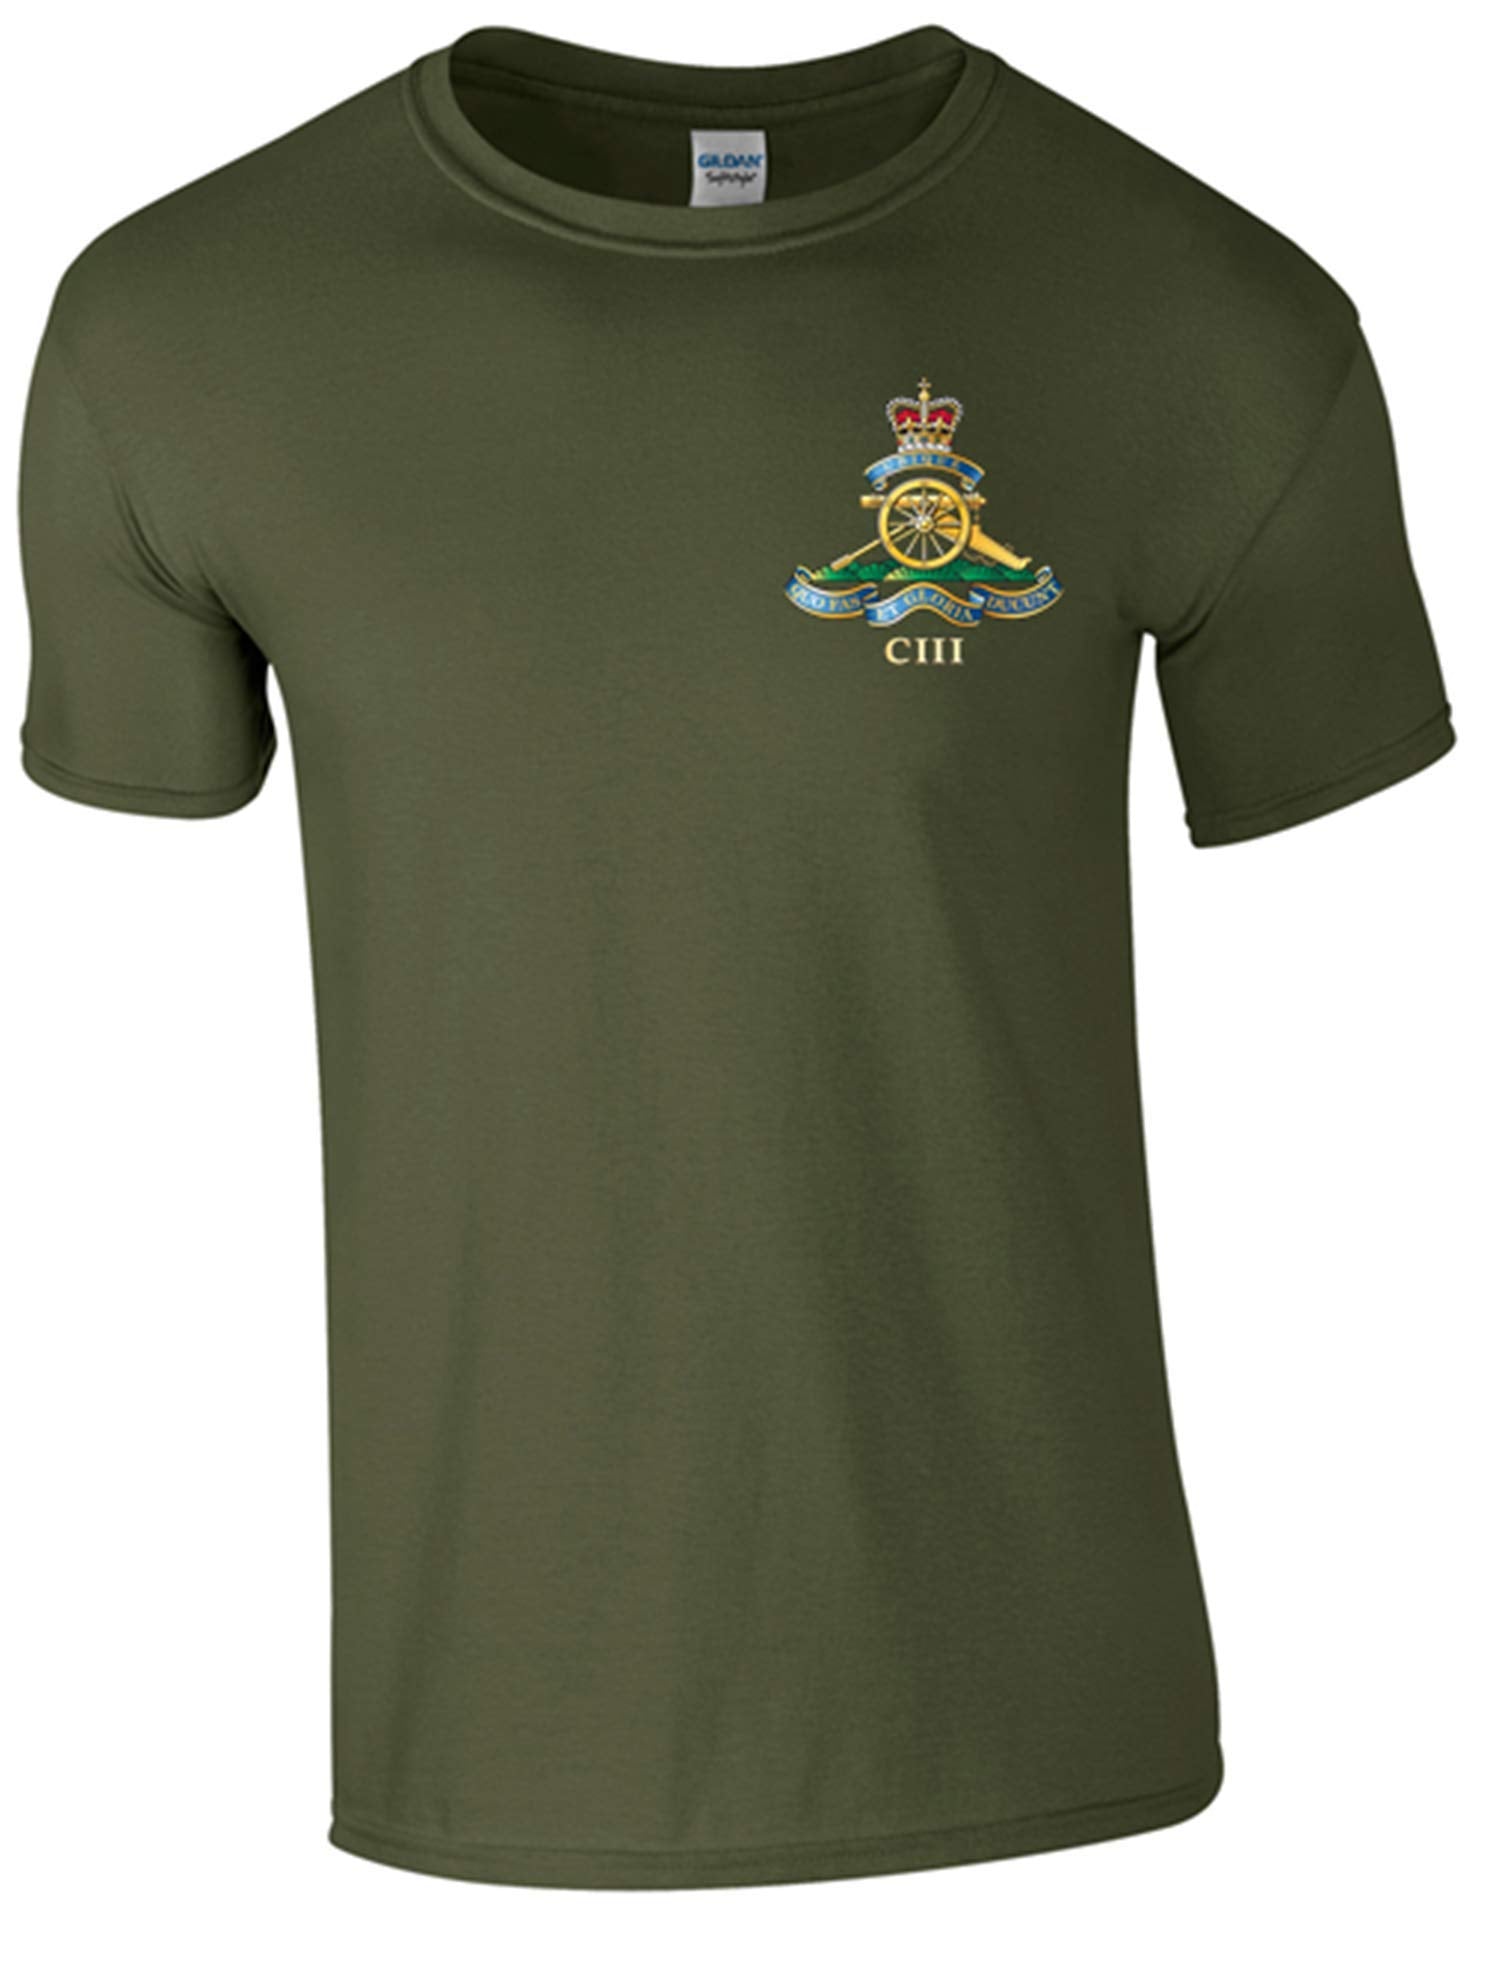 Official MOD Approved Merchandise 103 Regiment of Artillery T-Shirt Printed DTG (Direct to Garment) for a Permanent Finish. - Army 1157 kit XL Army 1157 Kit